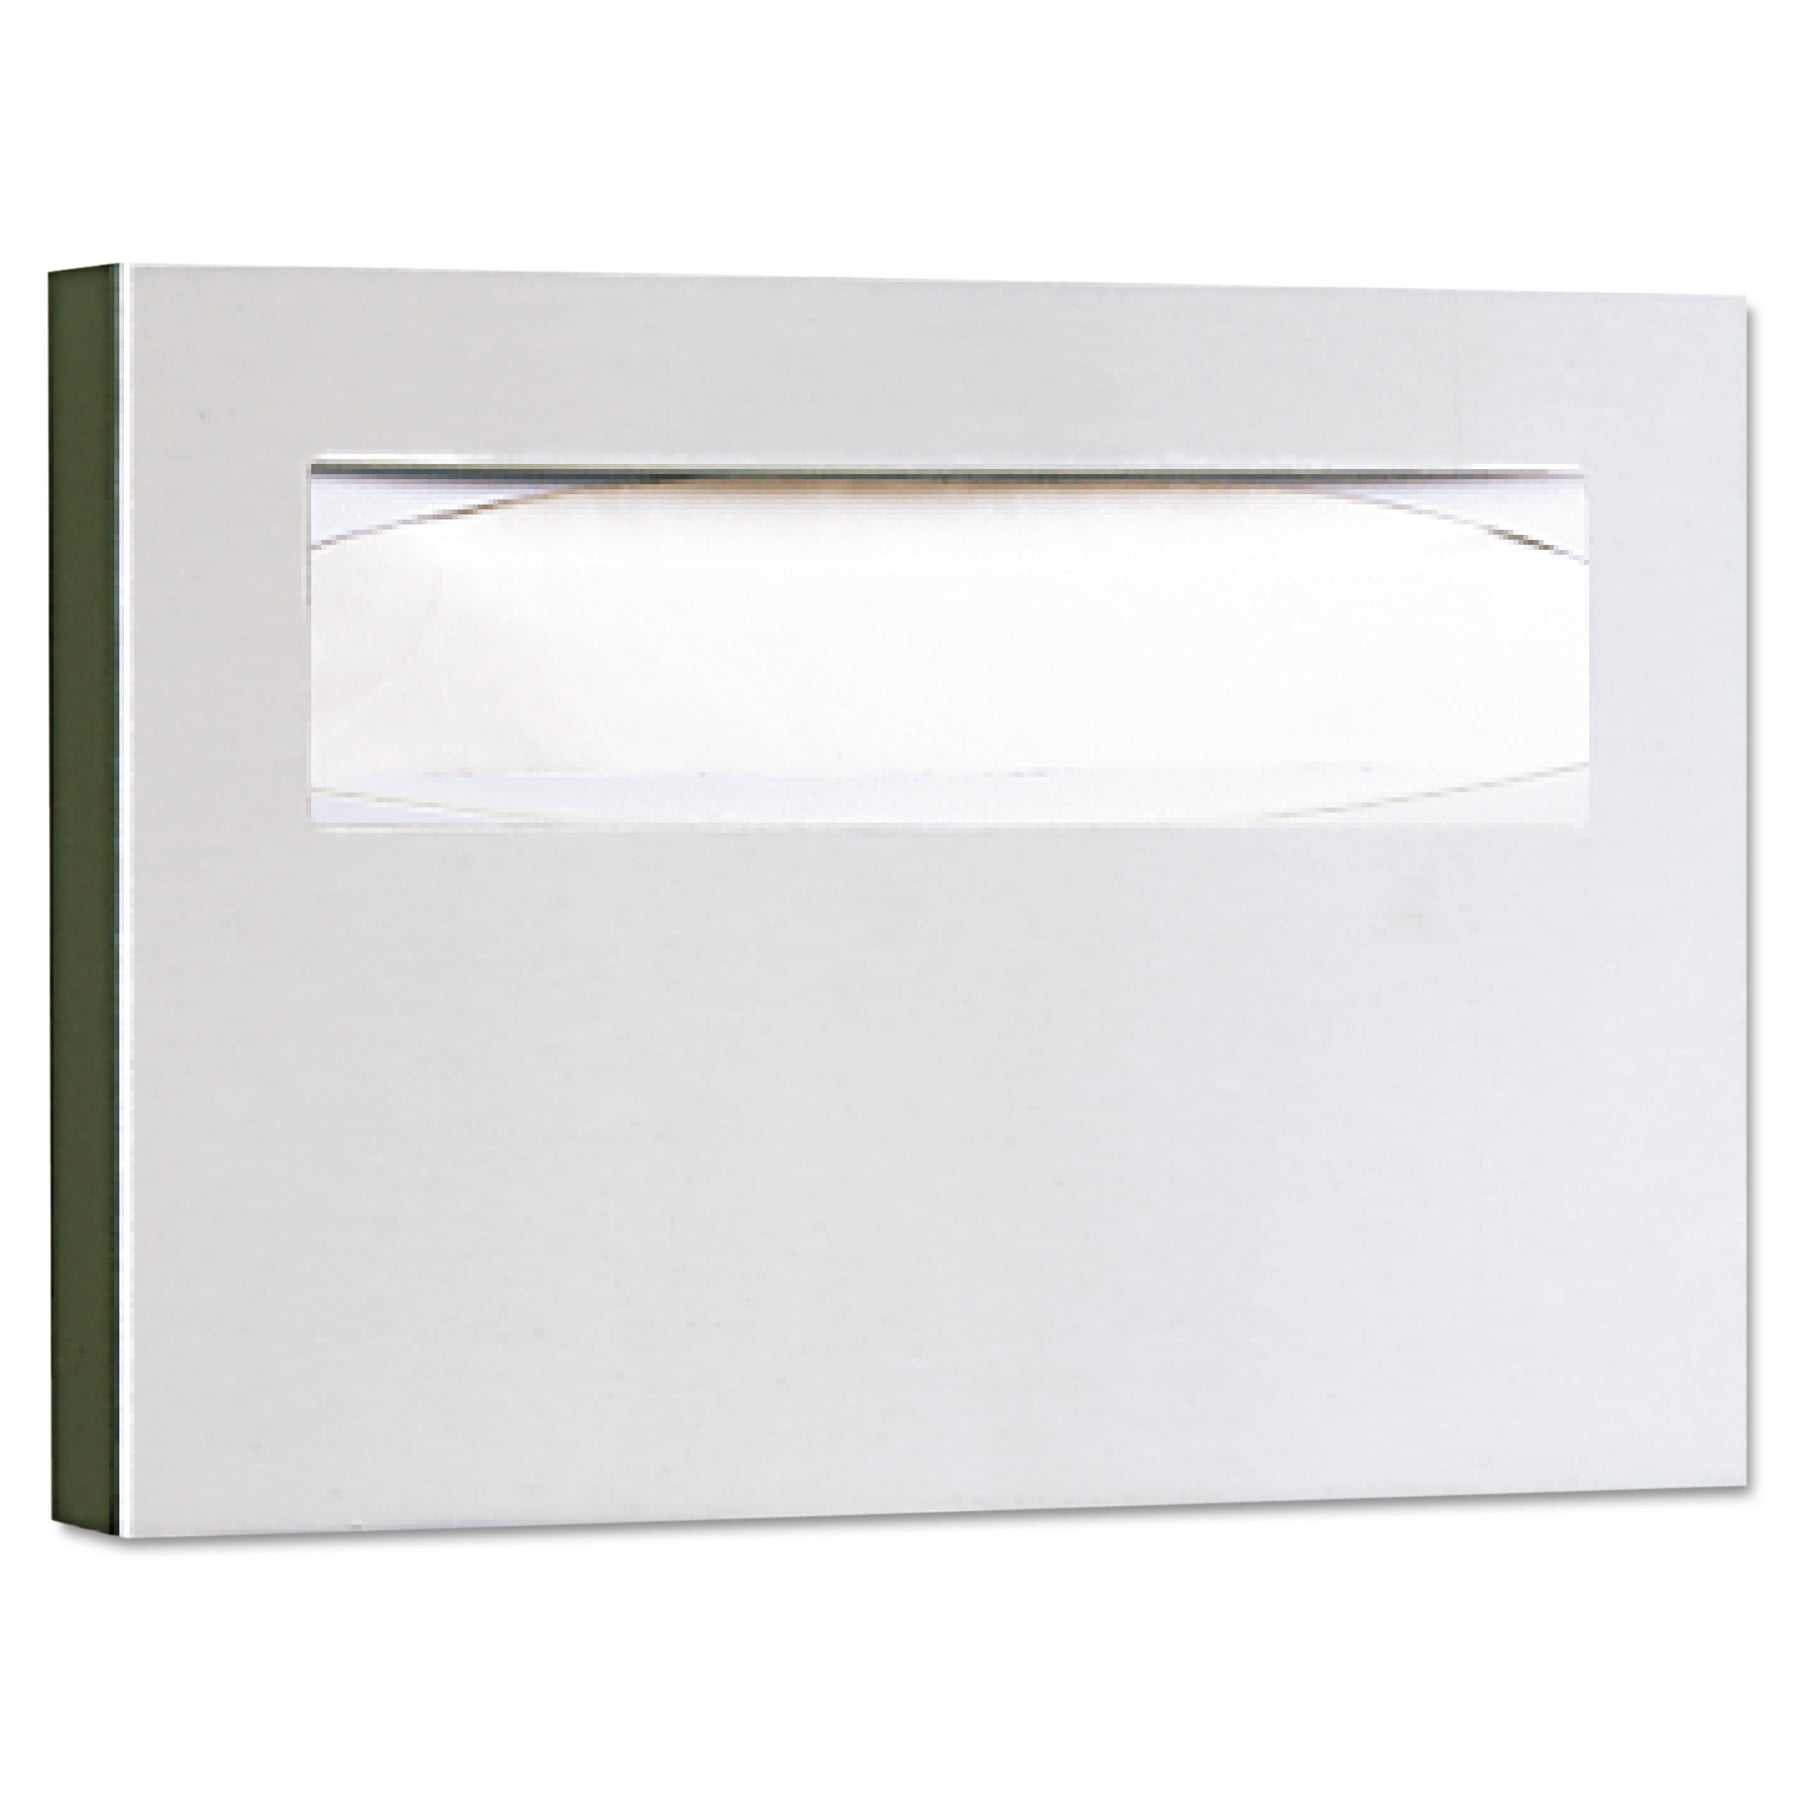 Satin Finish 15-3/16 Width x 10-3/4 Height Bobrick 301 ClassicSeries 304 Stainless Steel Recessed Toilet Seat-Cover Dispenser 